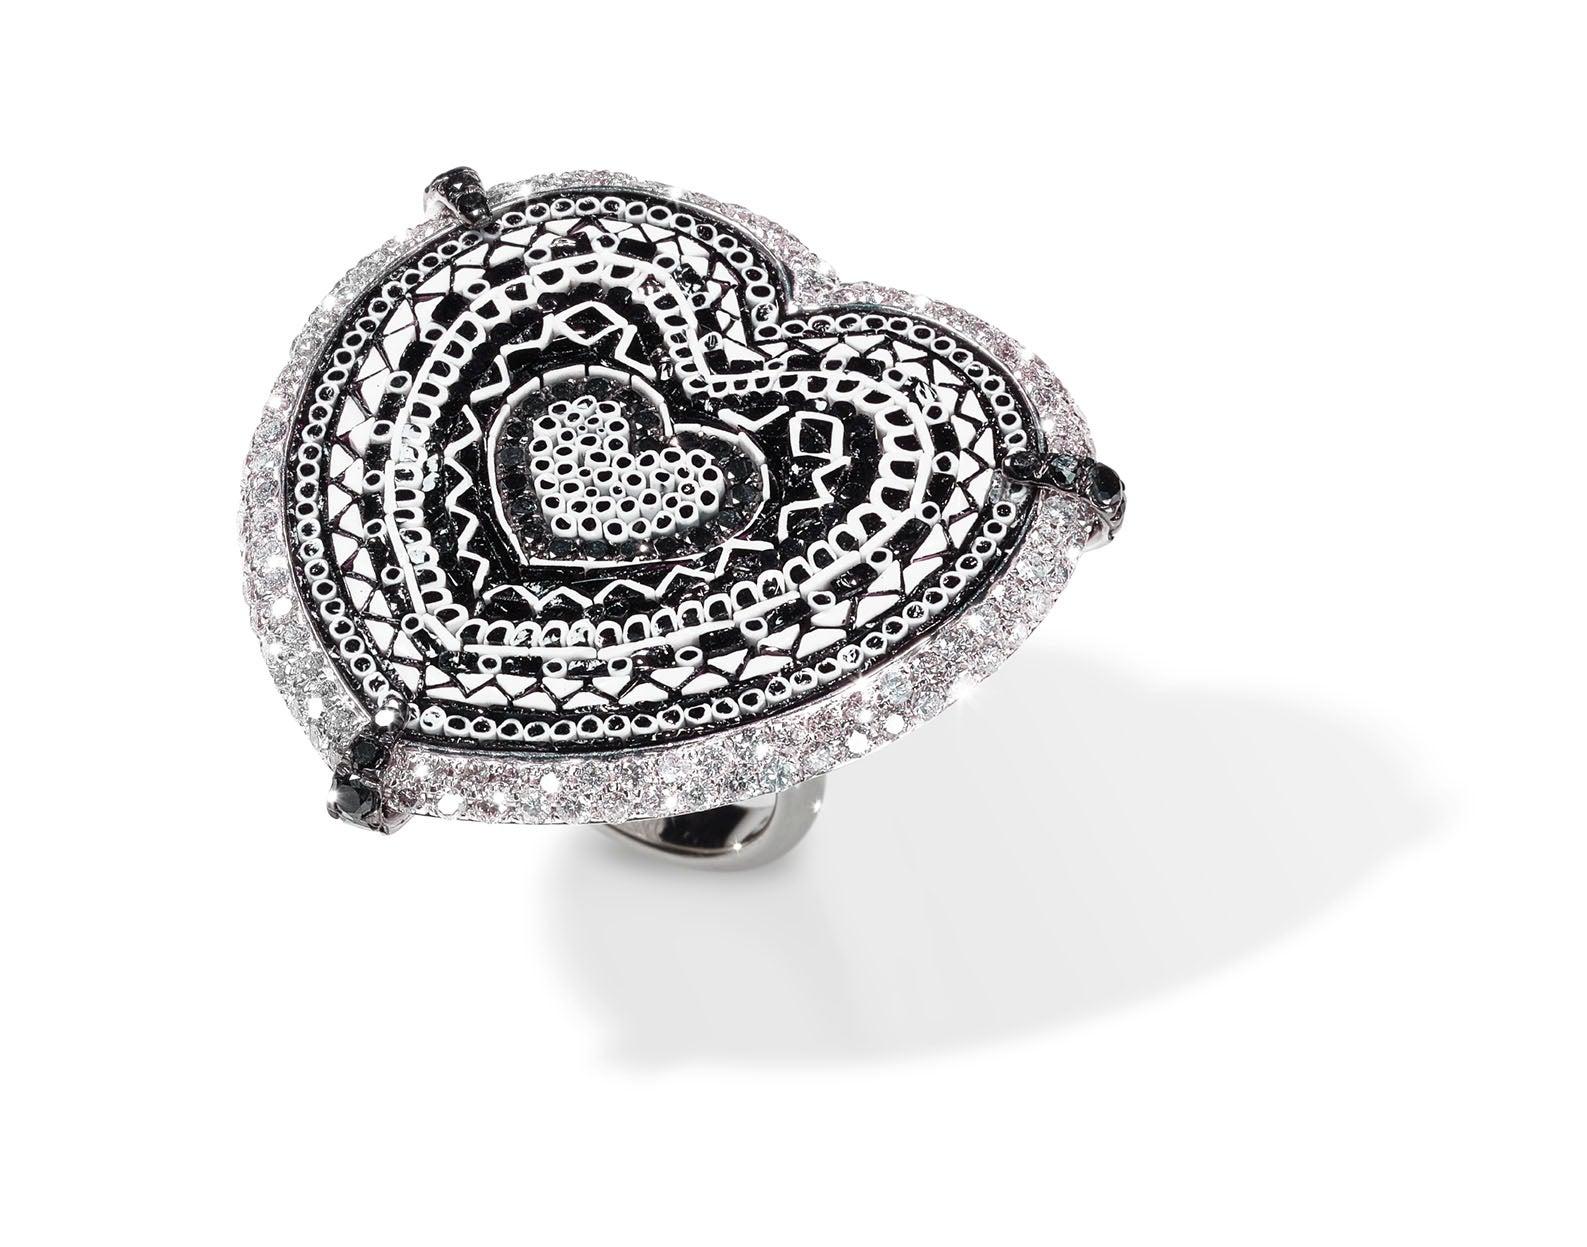 For Sale:  Stylish Ring White and Black Diamonds White Gold Hand Decorated Micromosaic 3